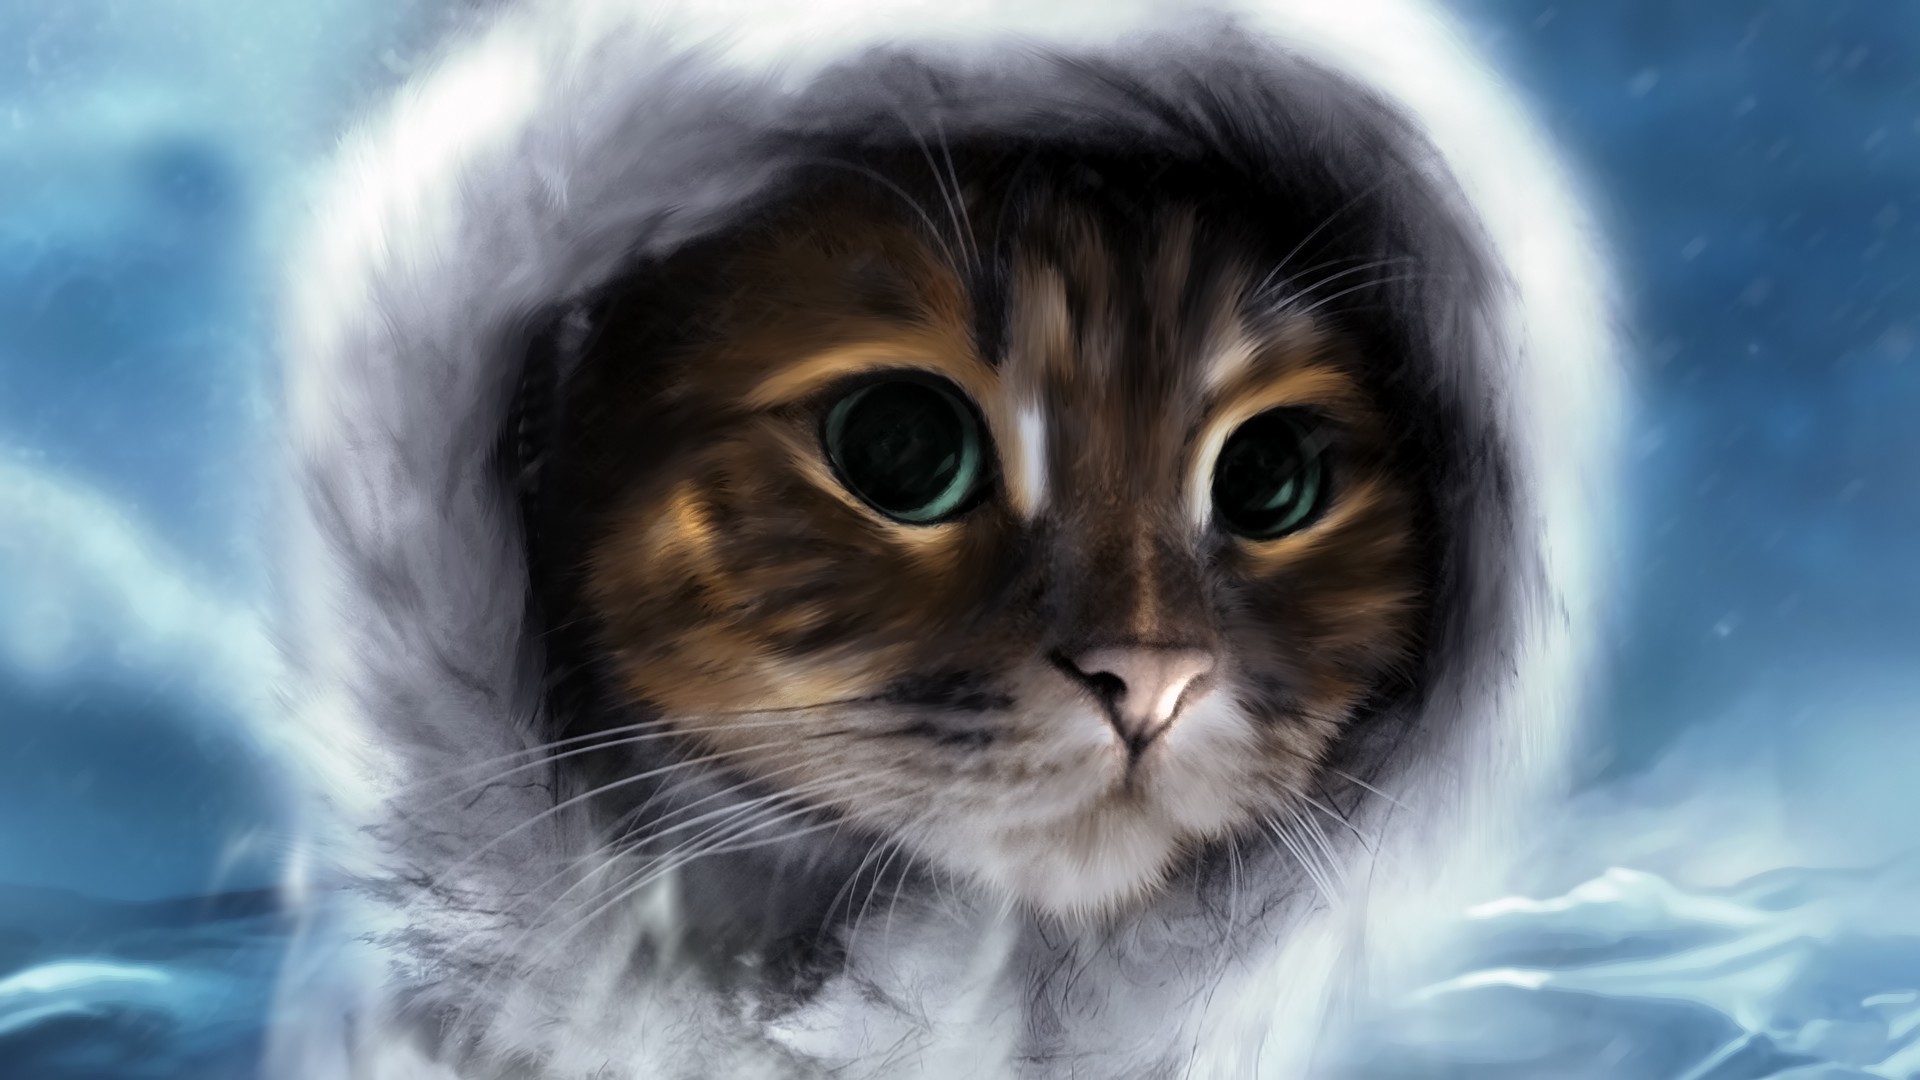 1920x1080 backgrounds for 3d cat wallpaper and backgrounds | www